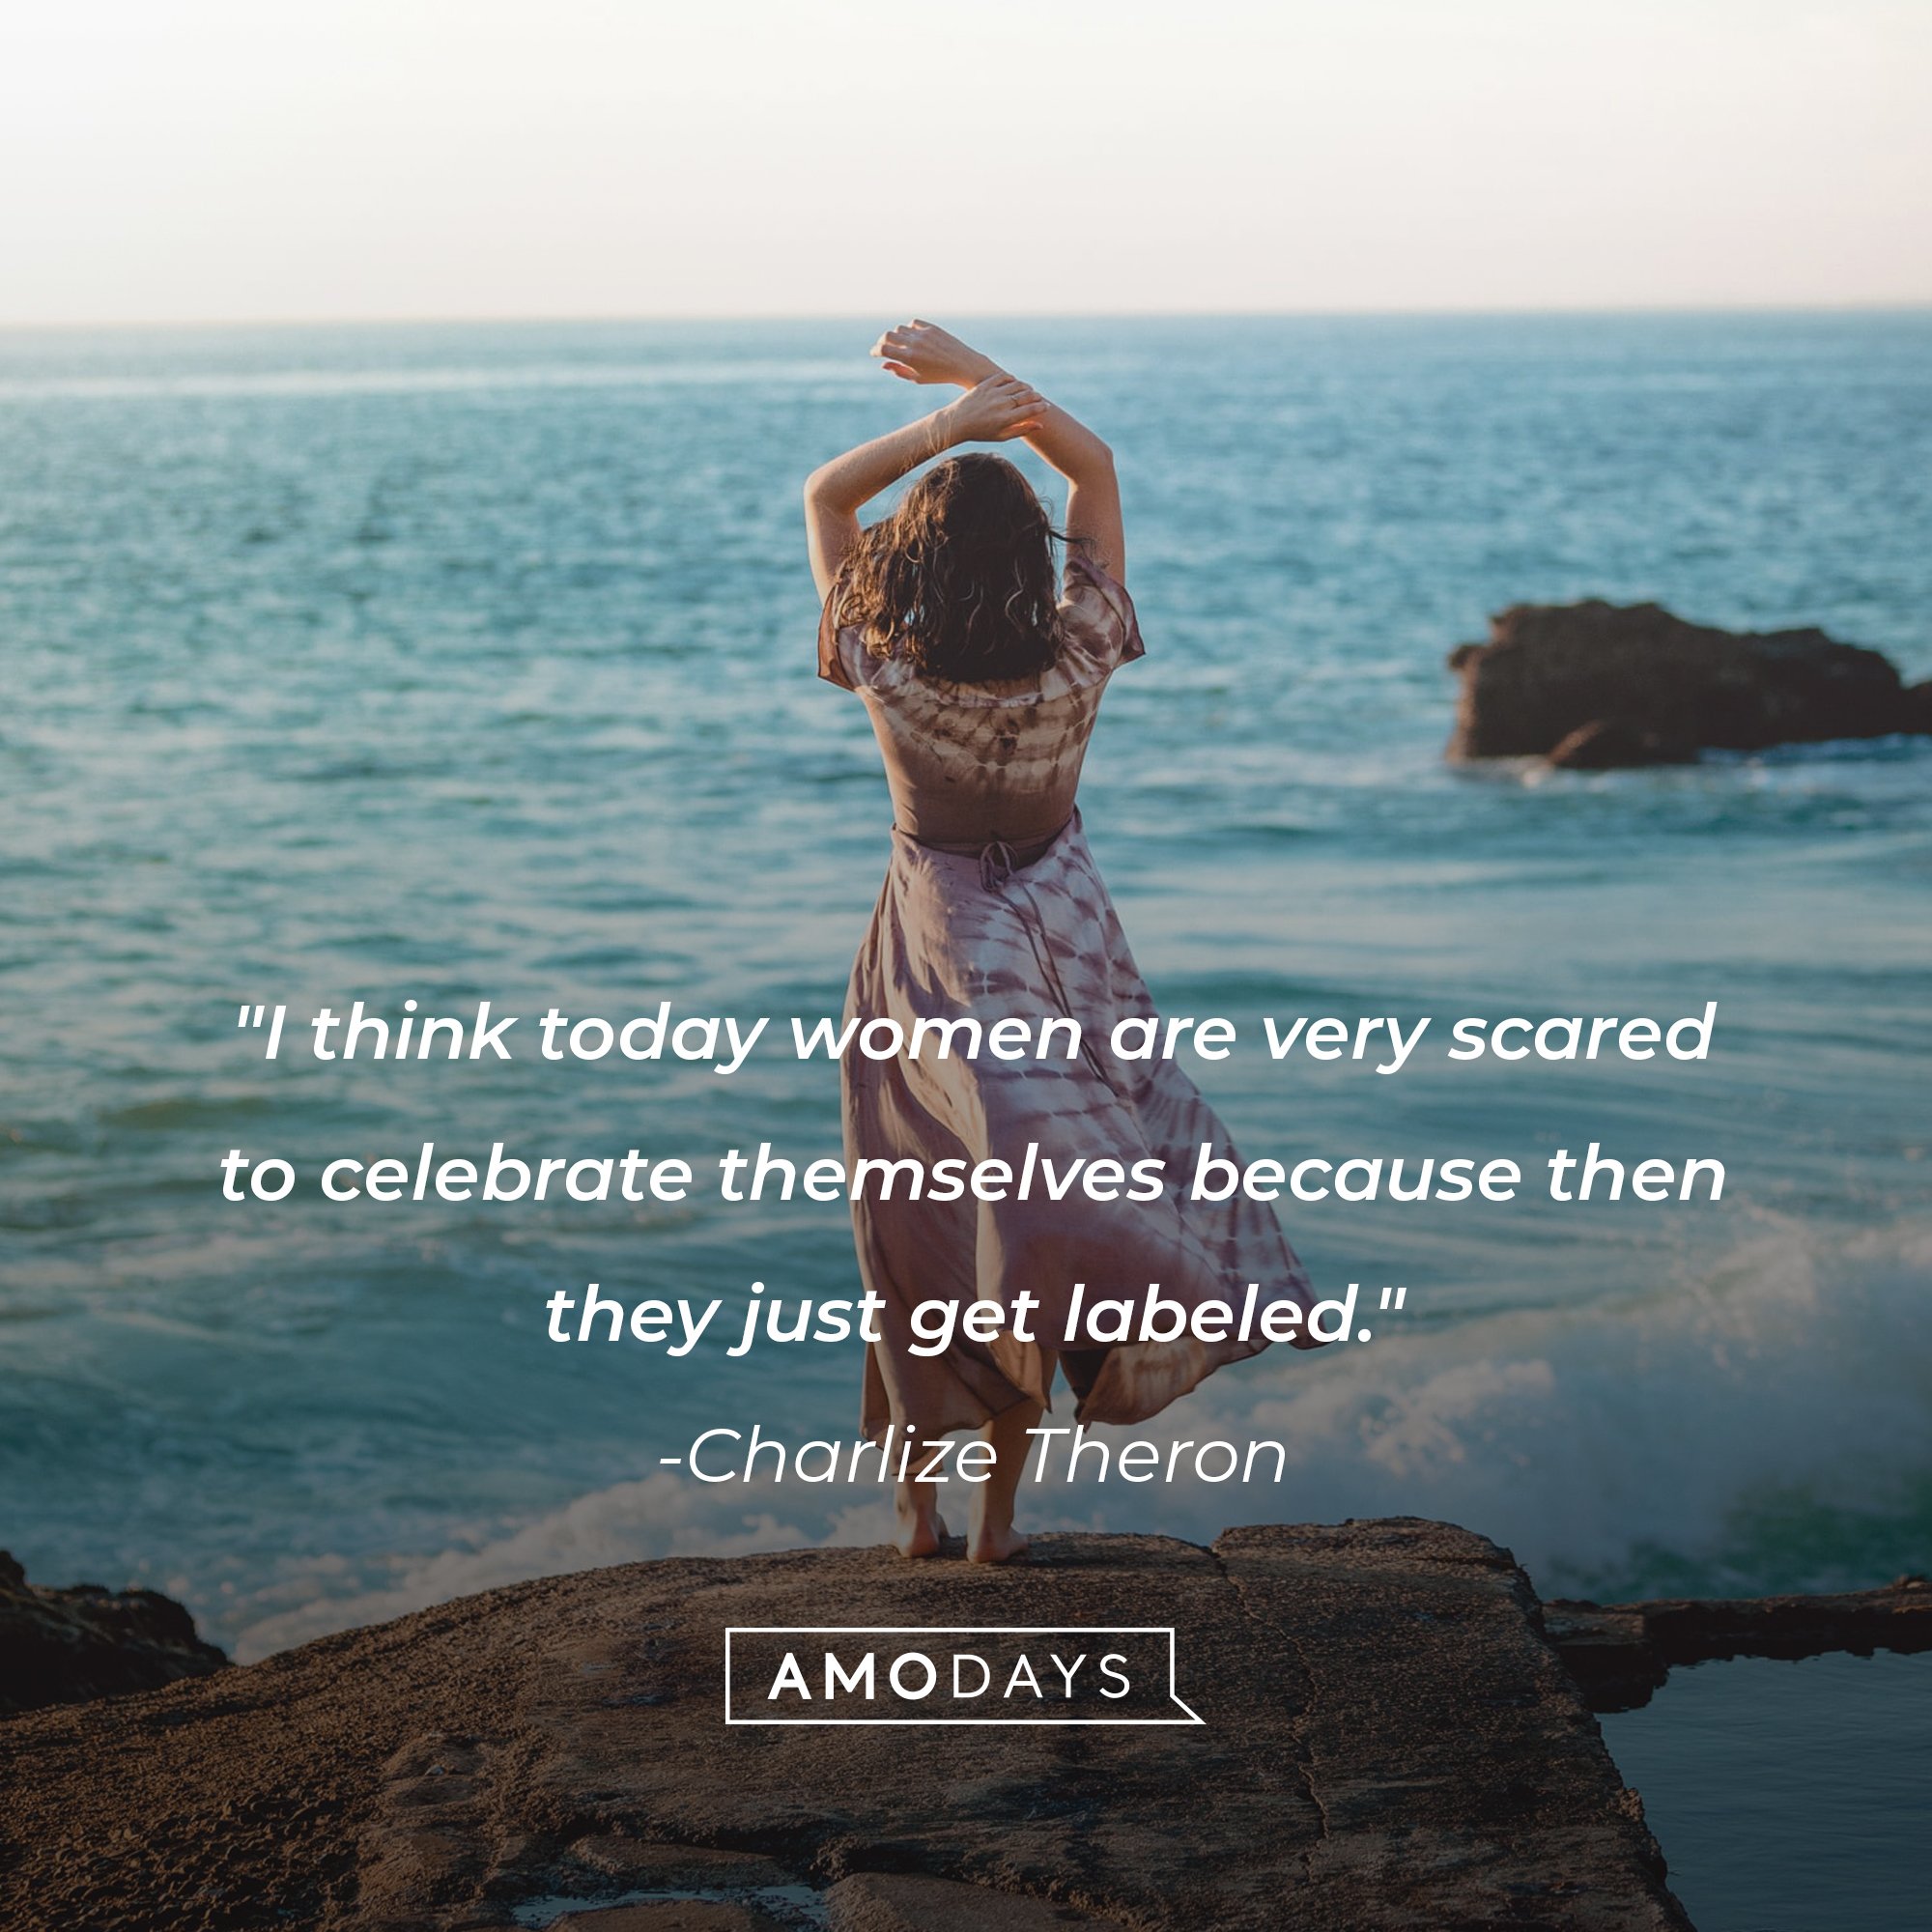   Charlize Theron’s quote: "I think today women are very scared to celebrate themselves because then they just get labeled."  | Image: AmoDays